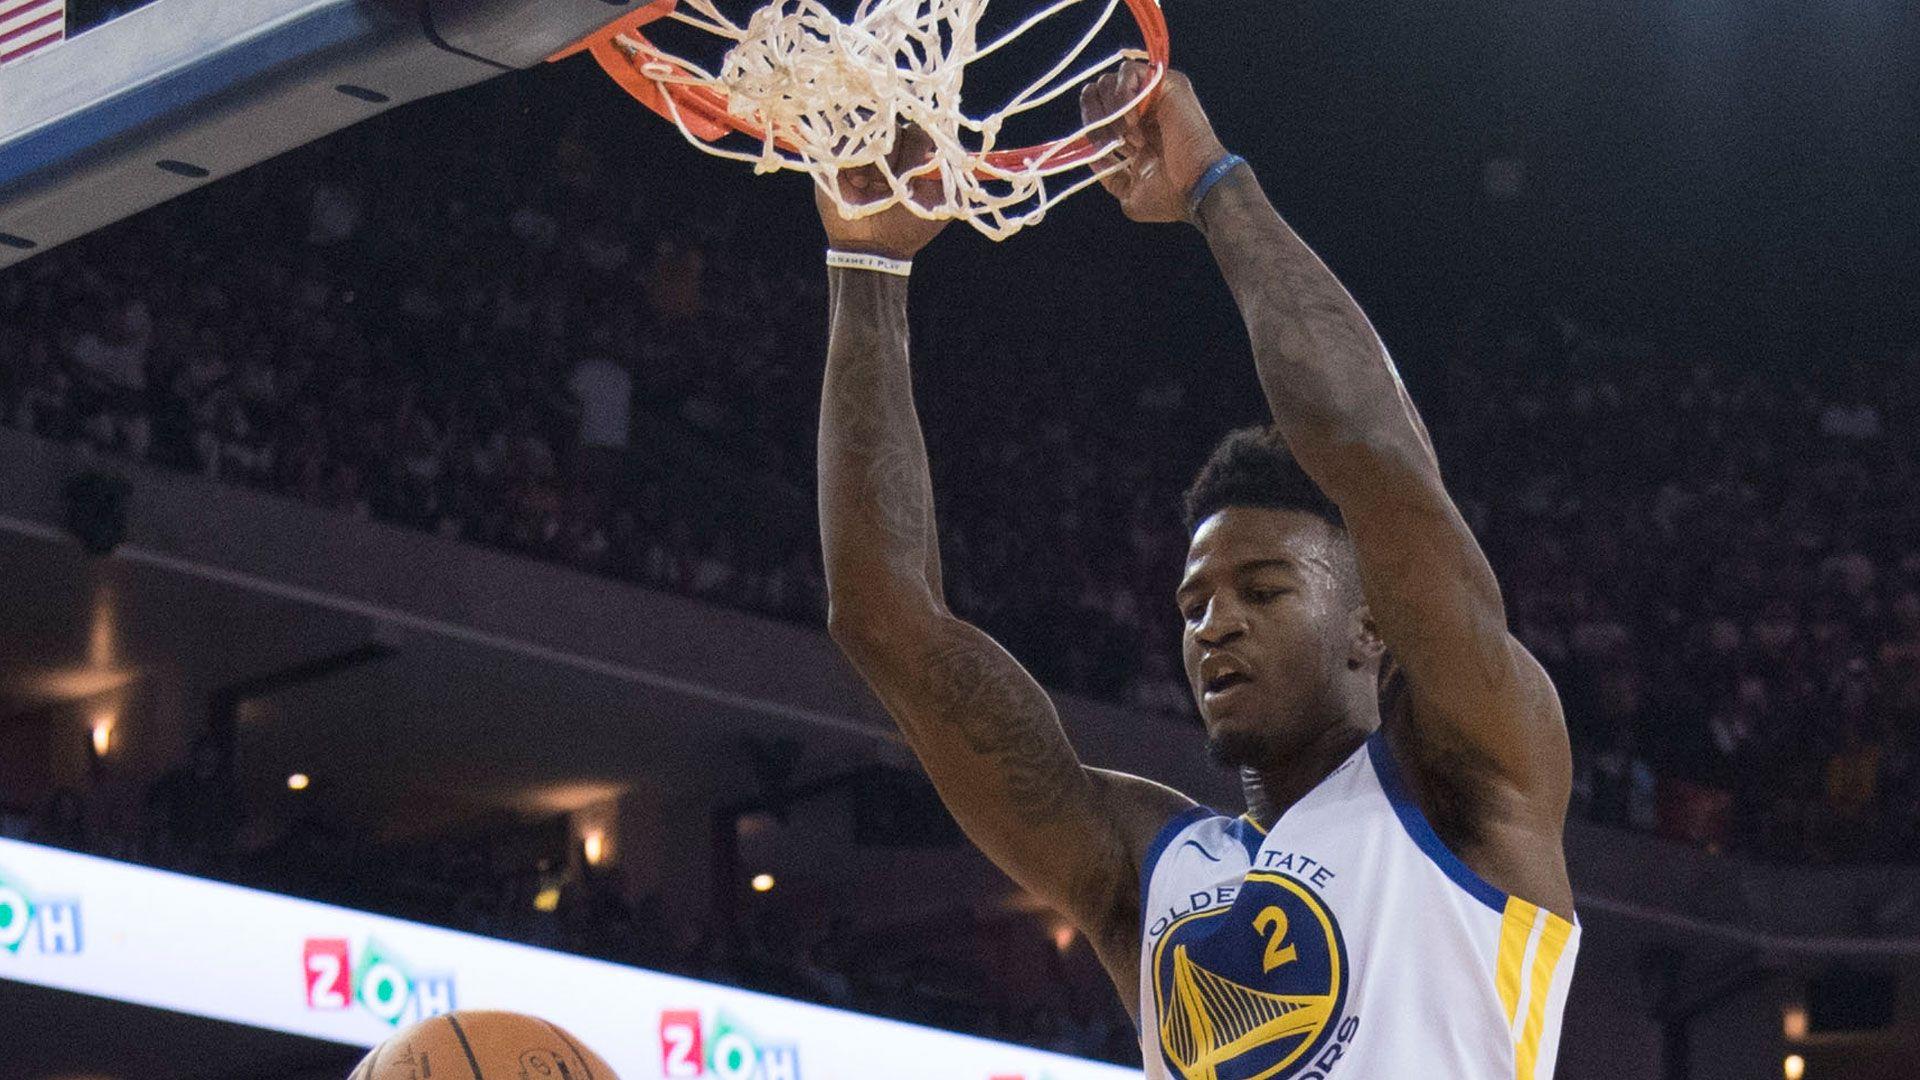 Jordan Bell on Dunk Contest: I'm All Able and Willing